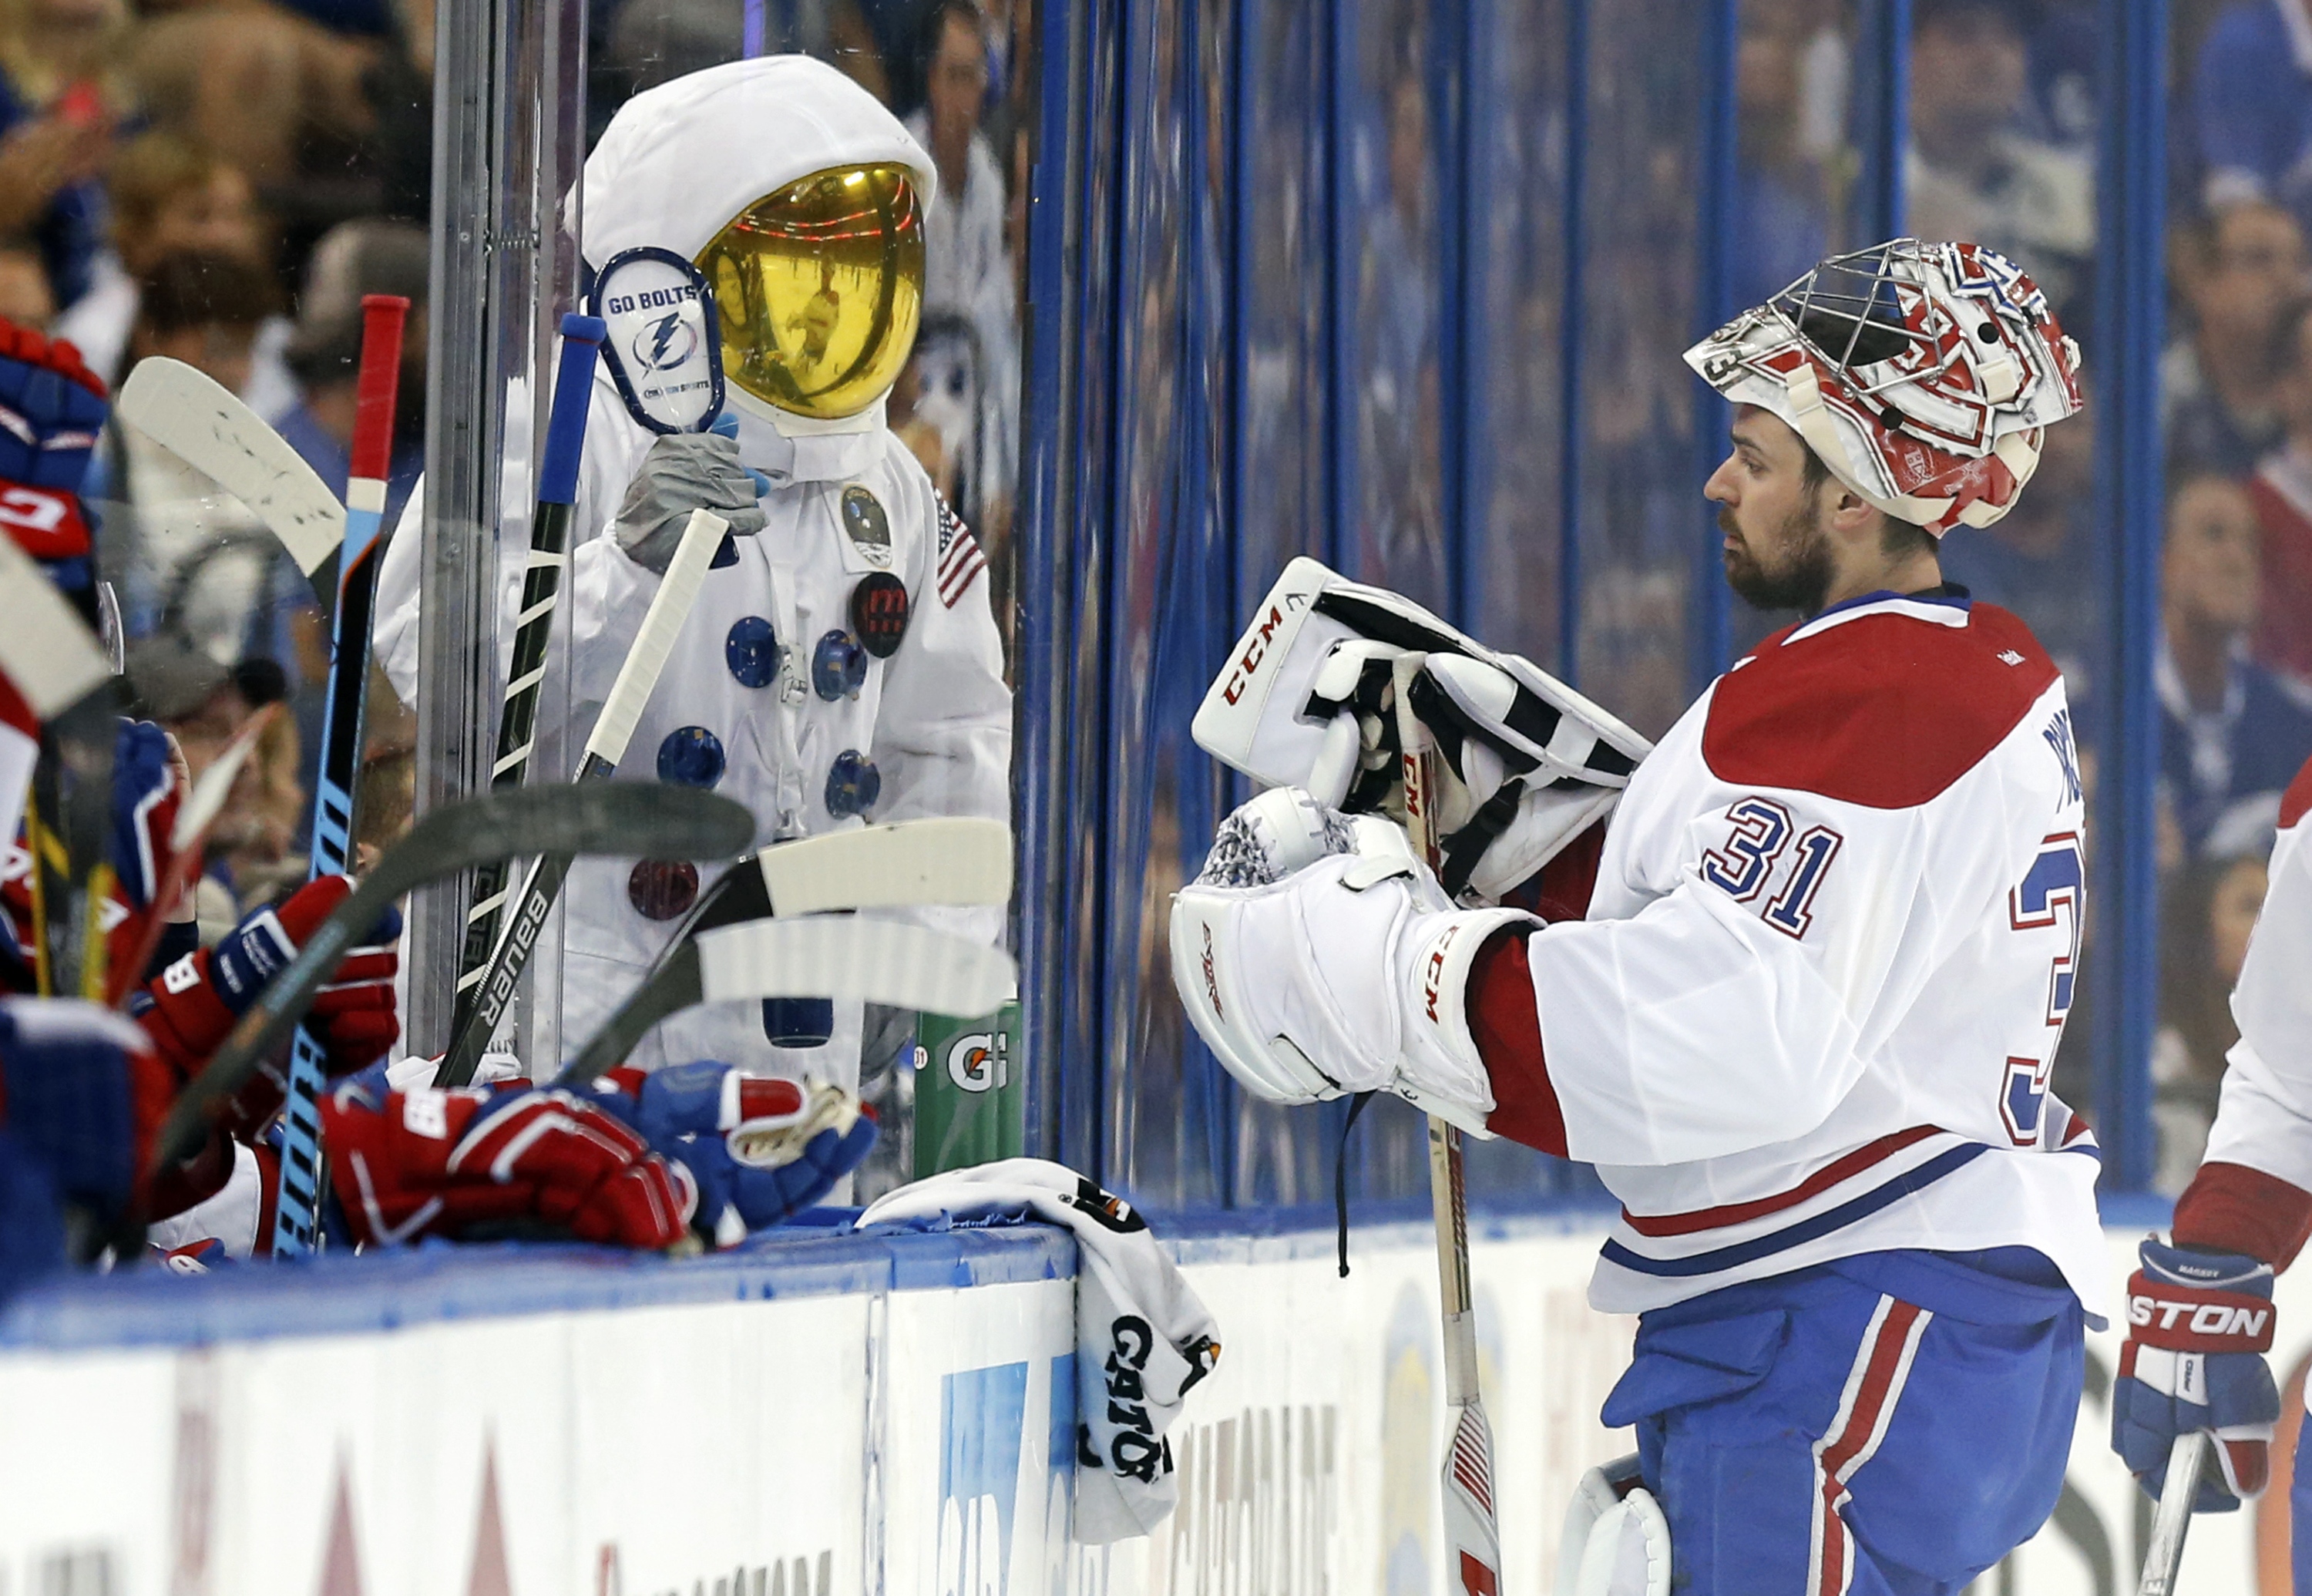 TAMPA, FL - MAY 12: A Tampa Bay Lightning fan dressed as an astronaut cheers in front of Carey Price #31 of the Montreal Canadiens in Game Six of the Eastern Conference Semifinals during the 2015 NHL Stanley Cup Playoffs at Amalie Arena on May 12, 2015 in Tampa, Florida. (Photo by Mike Carlson/Getty Images)